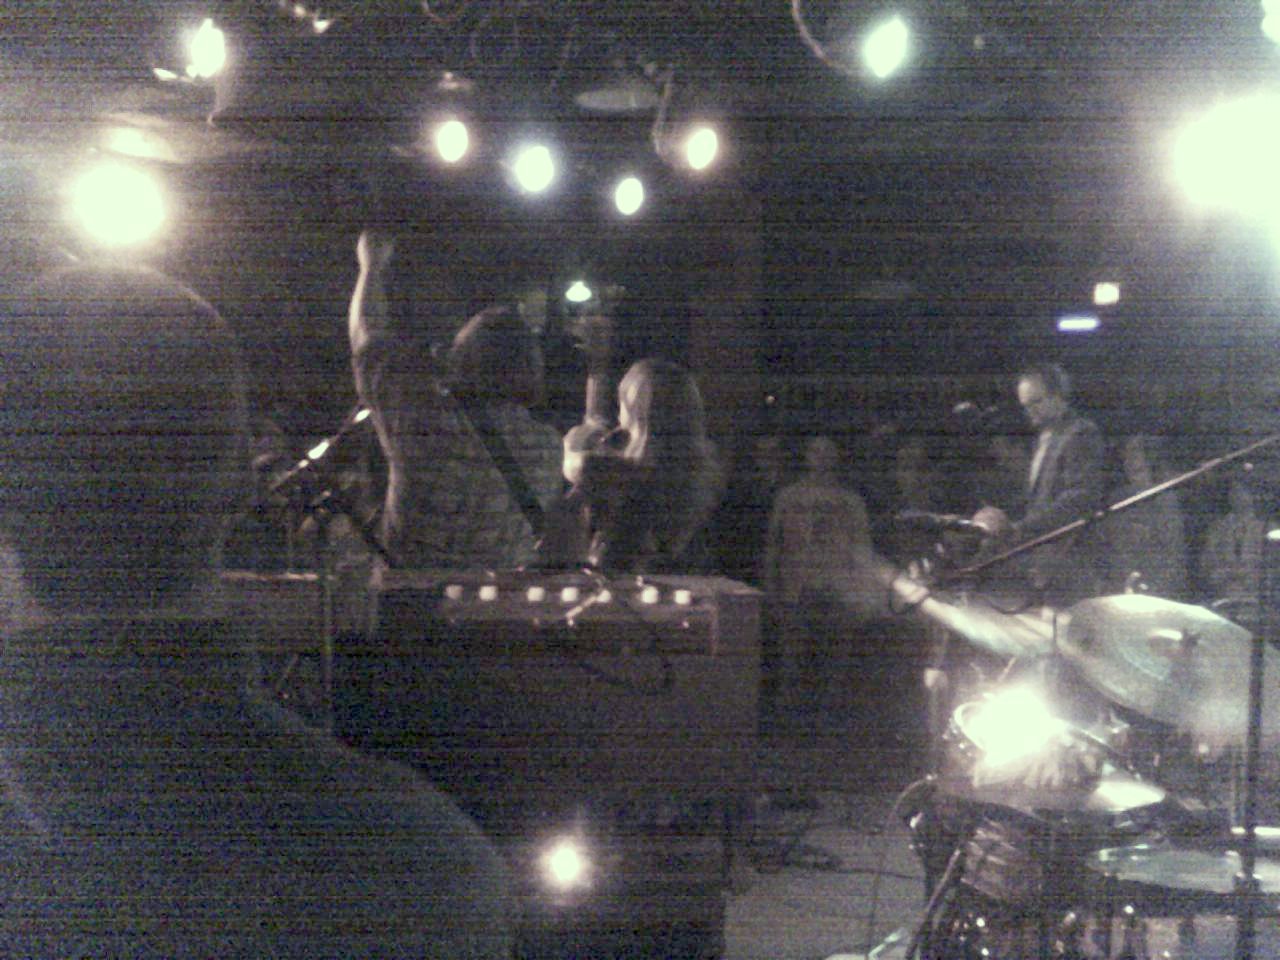 an audience watching a band on stage playing music